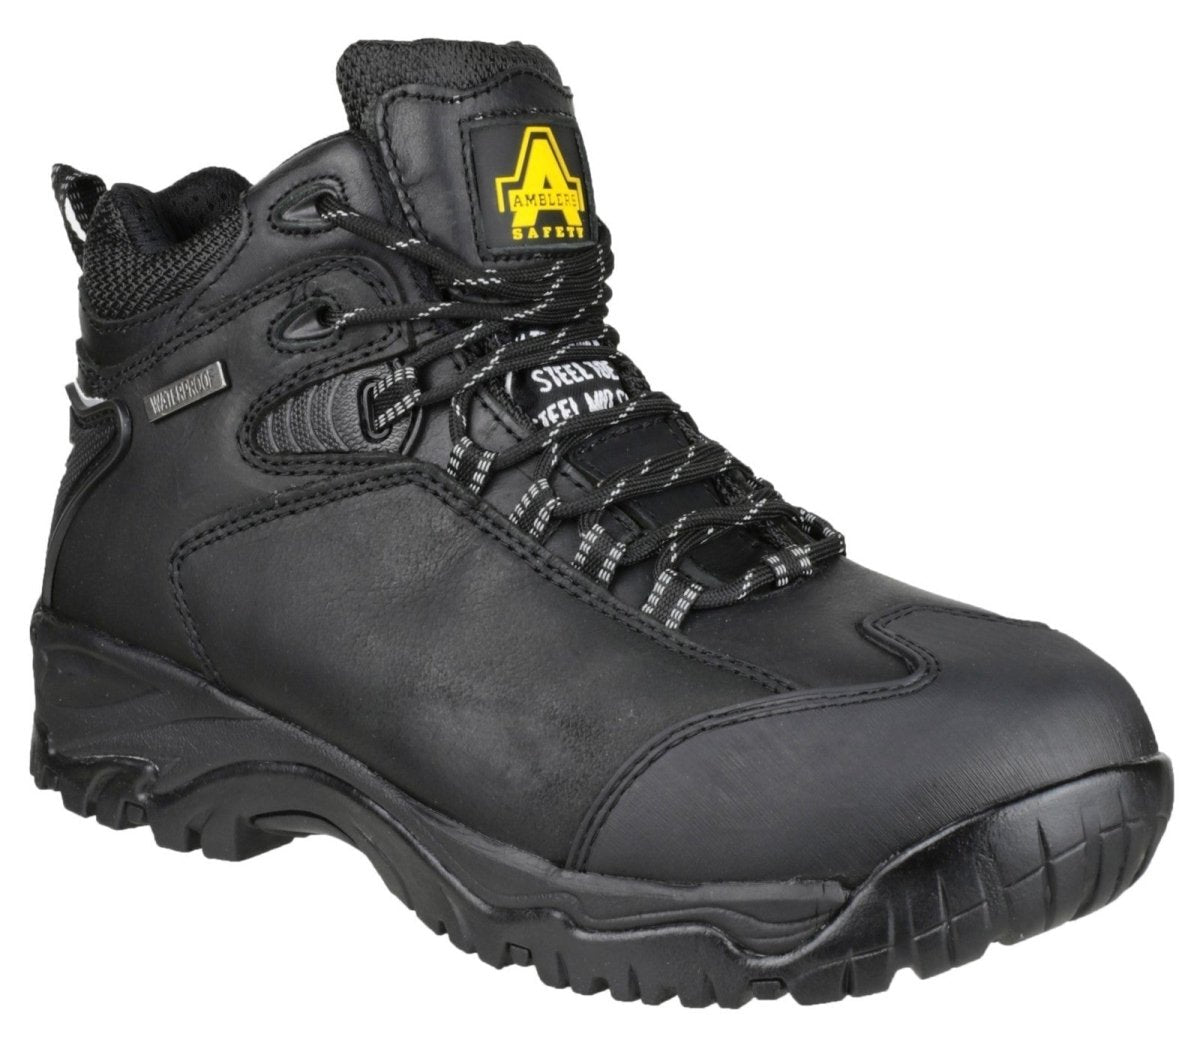 Amblers FS190 Waterproof Hiker Safety Boots - Shoe Store Direct